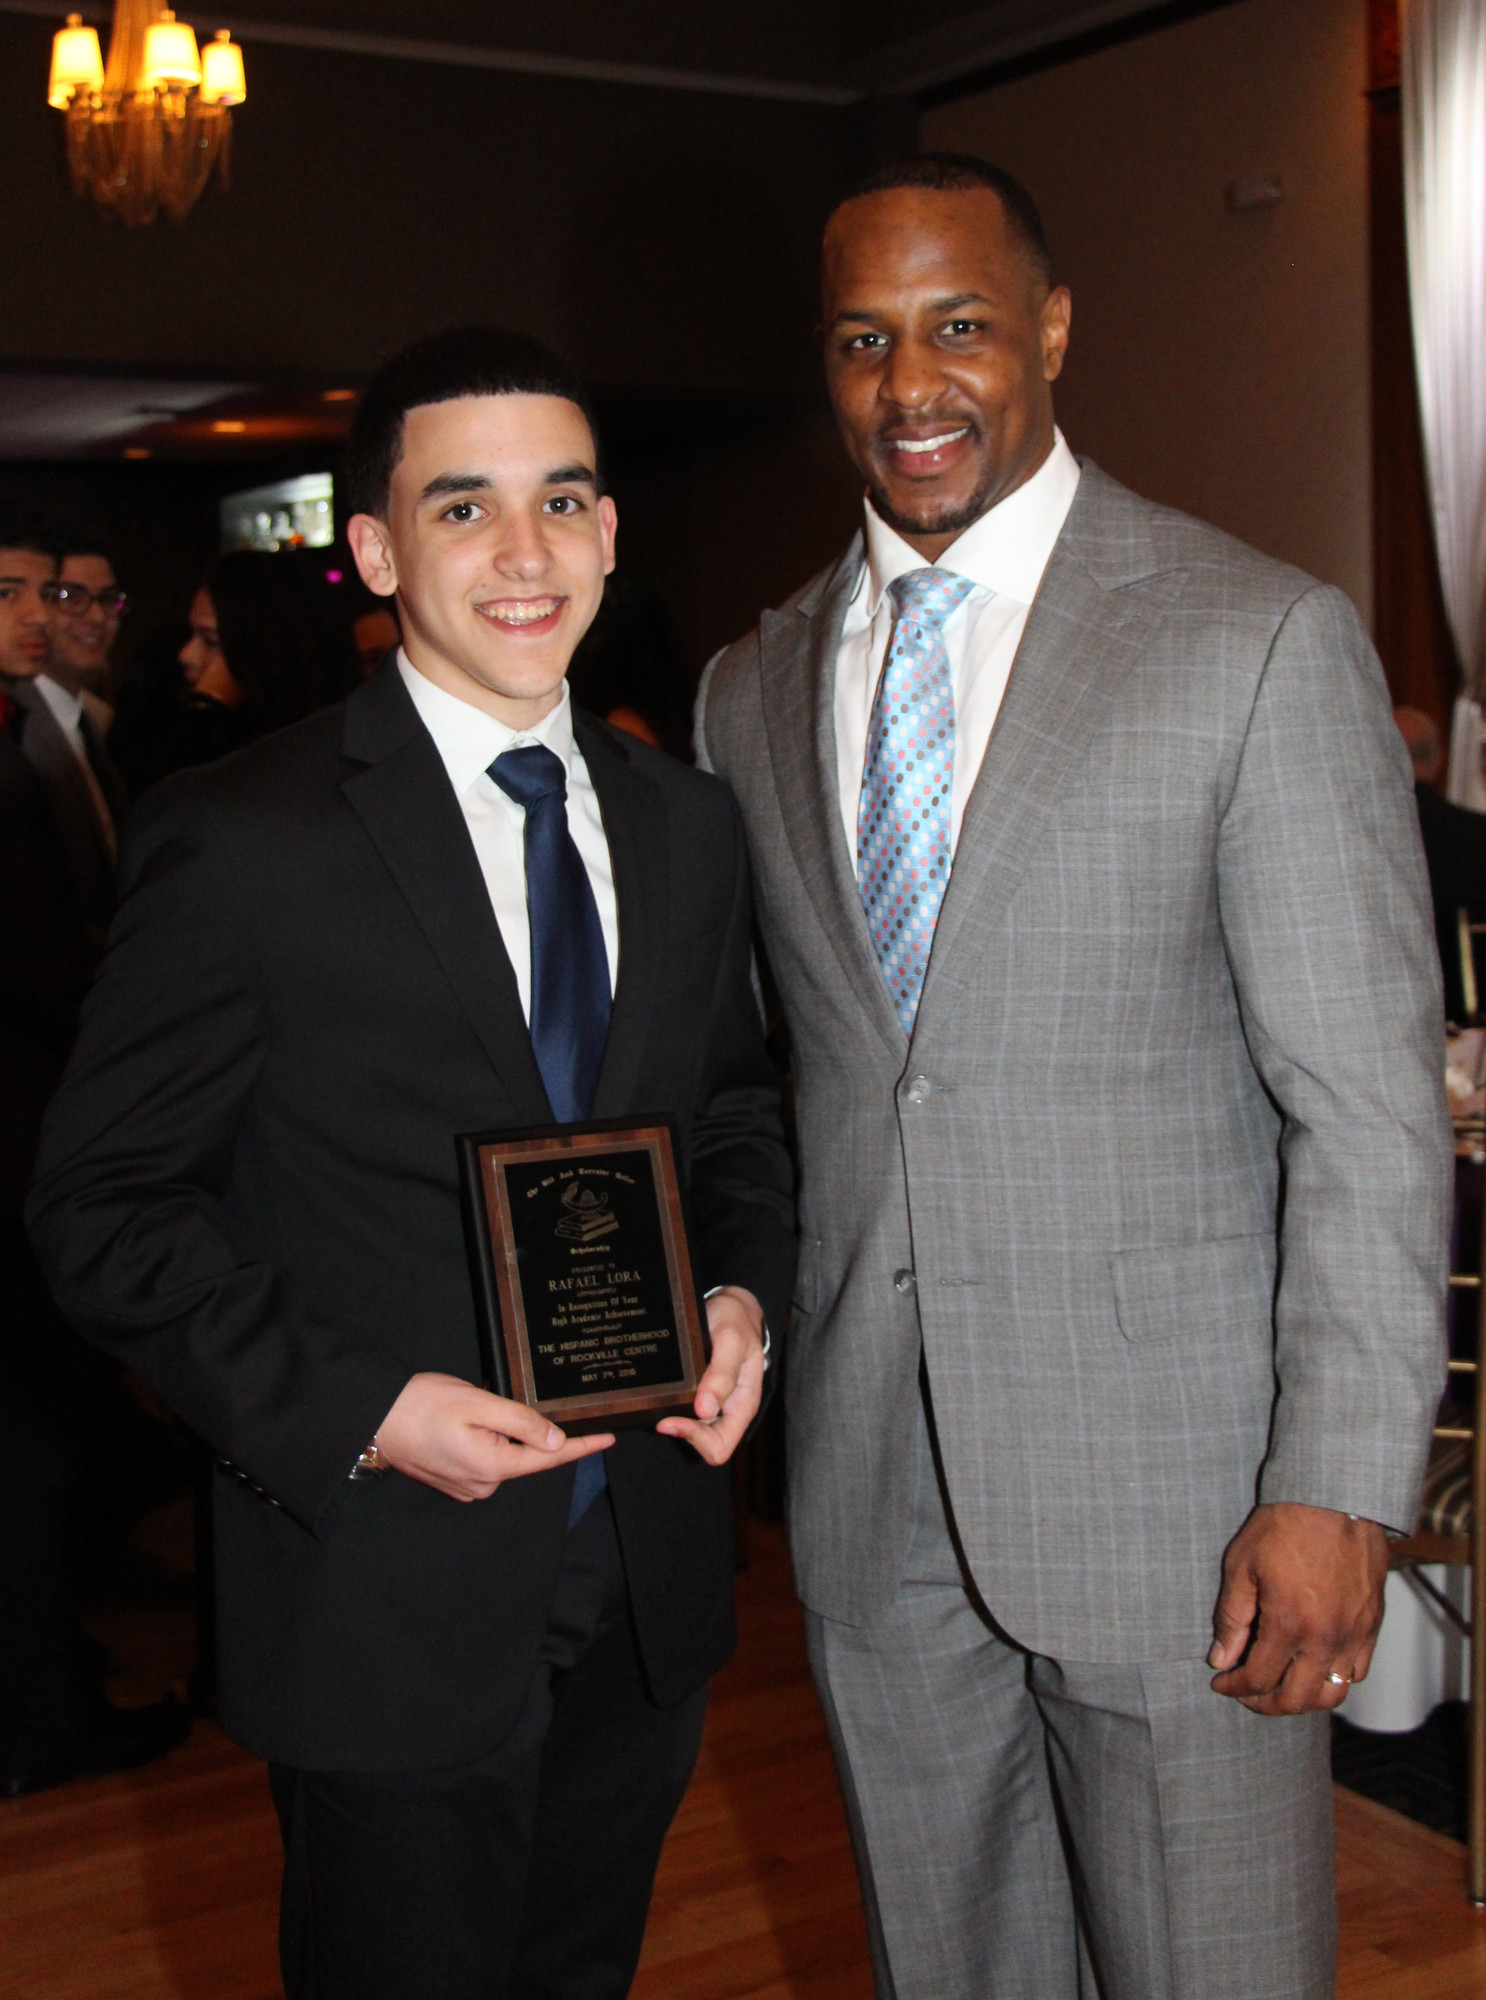 Scholarship winner Rafael Lora, left, with special quest Erik Coleman of the New York Jets.